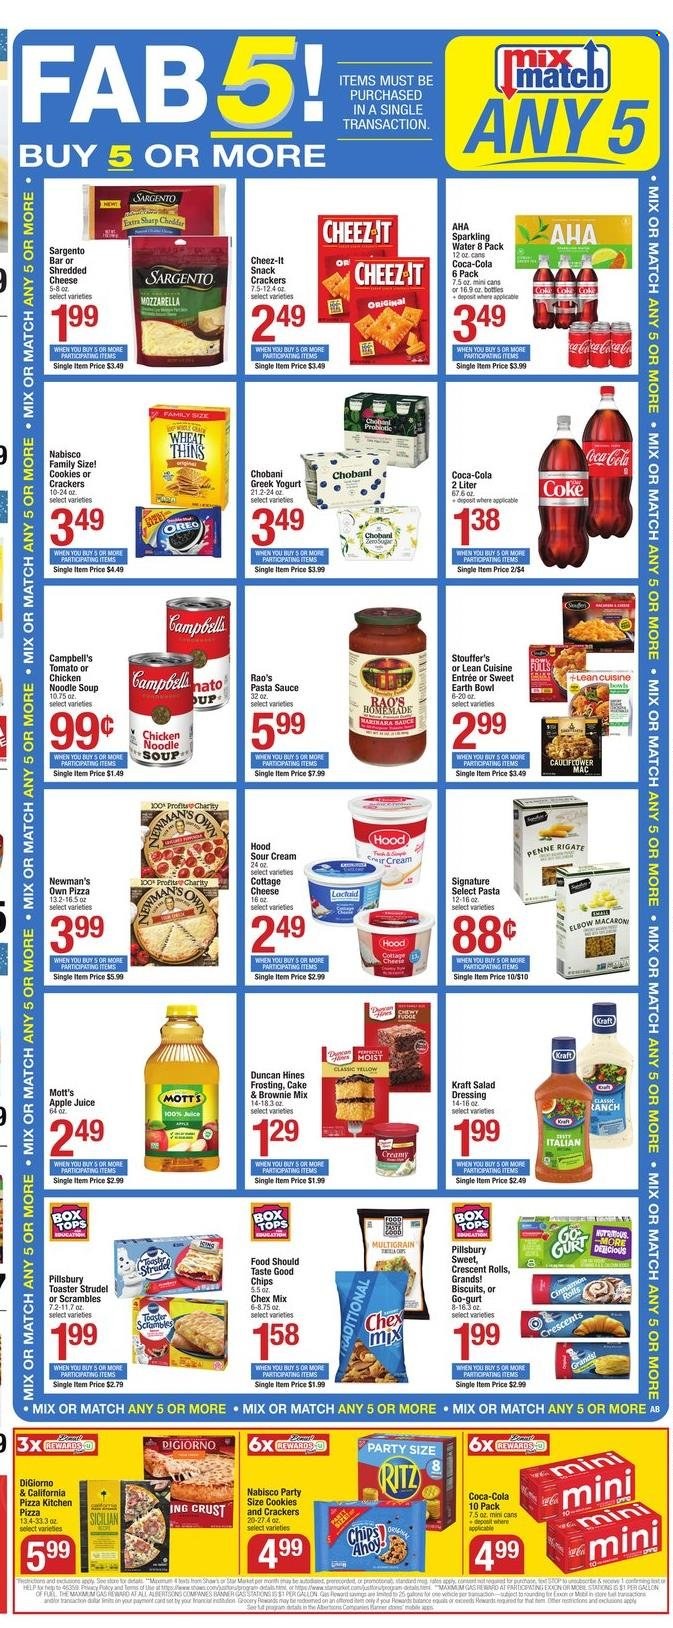 thumbnail - Shaw’s Flyer - 01/07/2022 - 01/13/2022 - Sales products - cake, strudel, cinnamon roll, crescent rolls, brownie mix, salad, Mott's, Campbell's, pizza, pasta sauce, soup, sauce, Pillsbury, noodles cup, noodles, Lean Cuisine, Kraft®, cottage cheese, shredded cheese, Sargento, greek yoghurt, Oreo, yoghurt, Chobani, sour cream, Stouffer's, cookies, snack, crackers, biscuit, RITZ, chips, Thins, Cheez-It, Chex Mix, frosting, penne, dressing, apple juice, Coca-Cola, juice, sparkling water, bowl. Page 3.